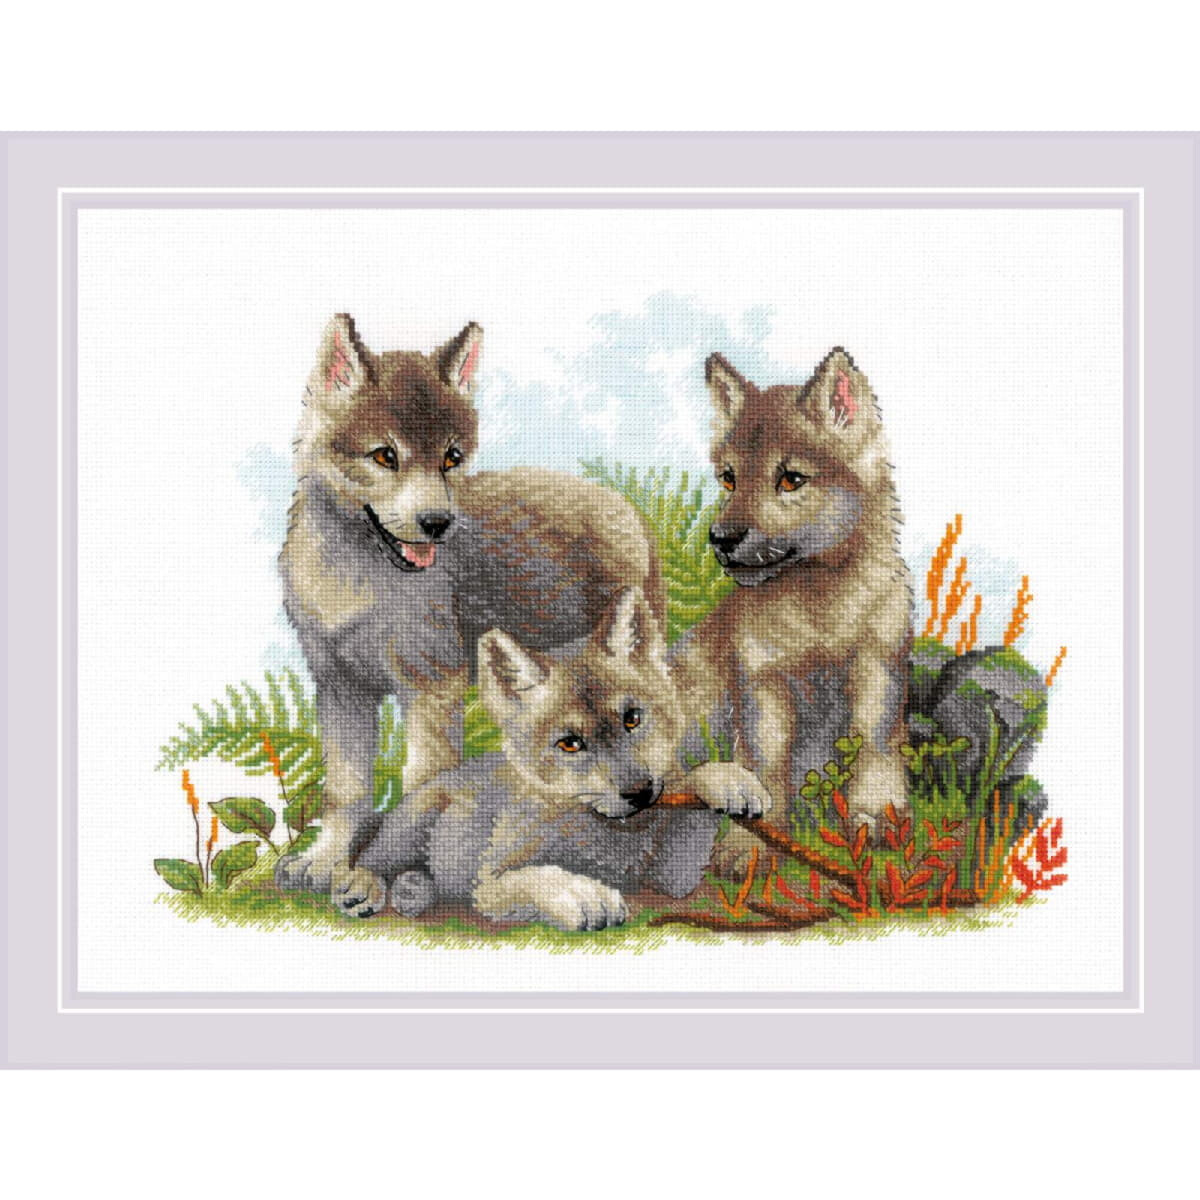 Riolis counted cross stitch kit "Sons of the...